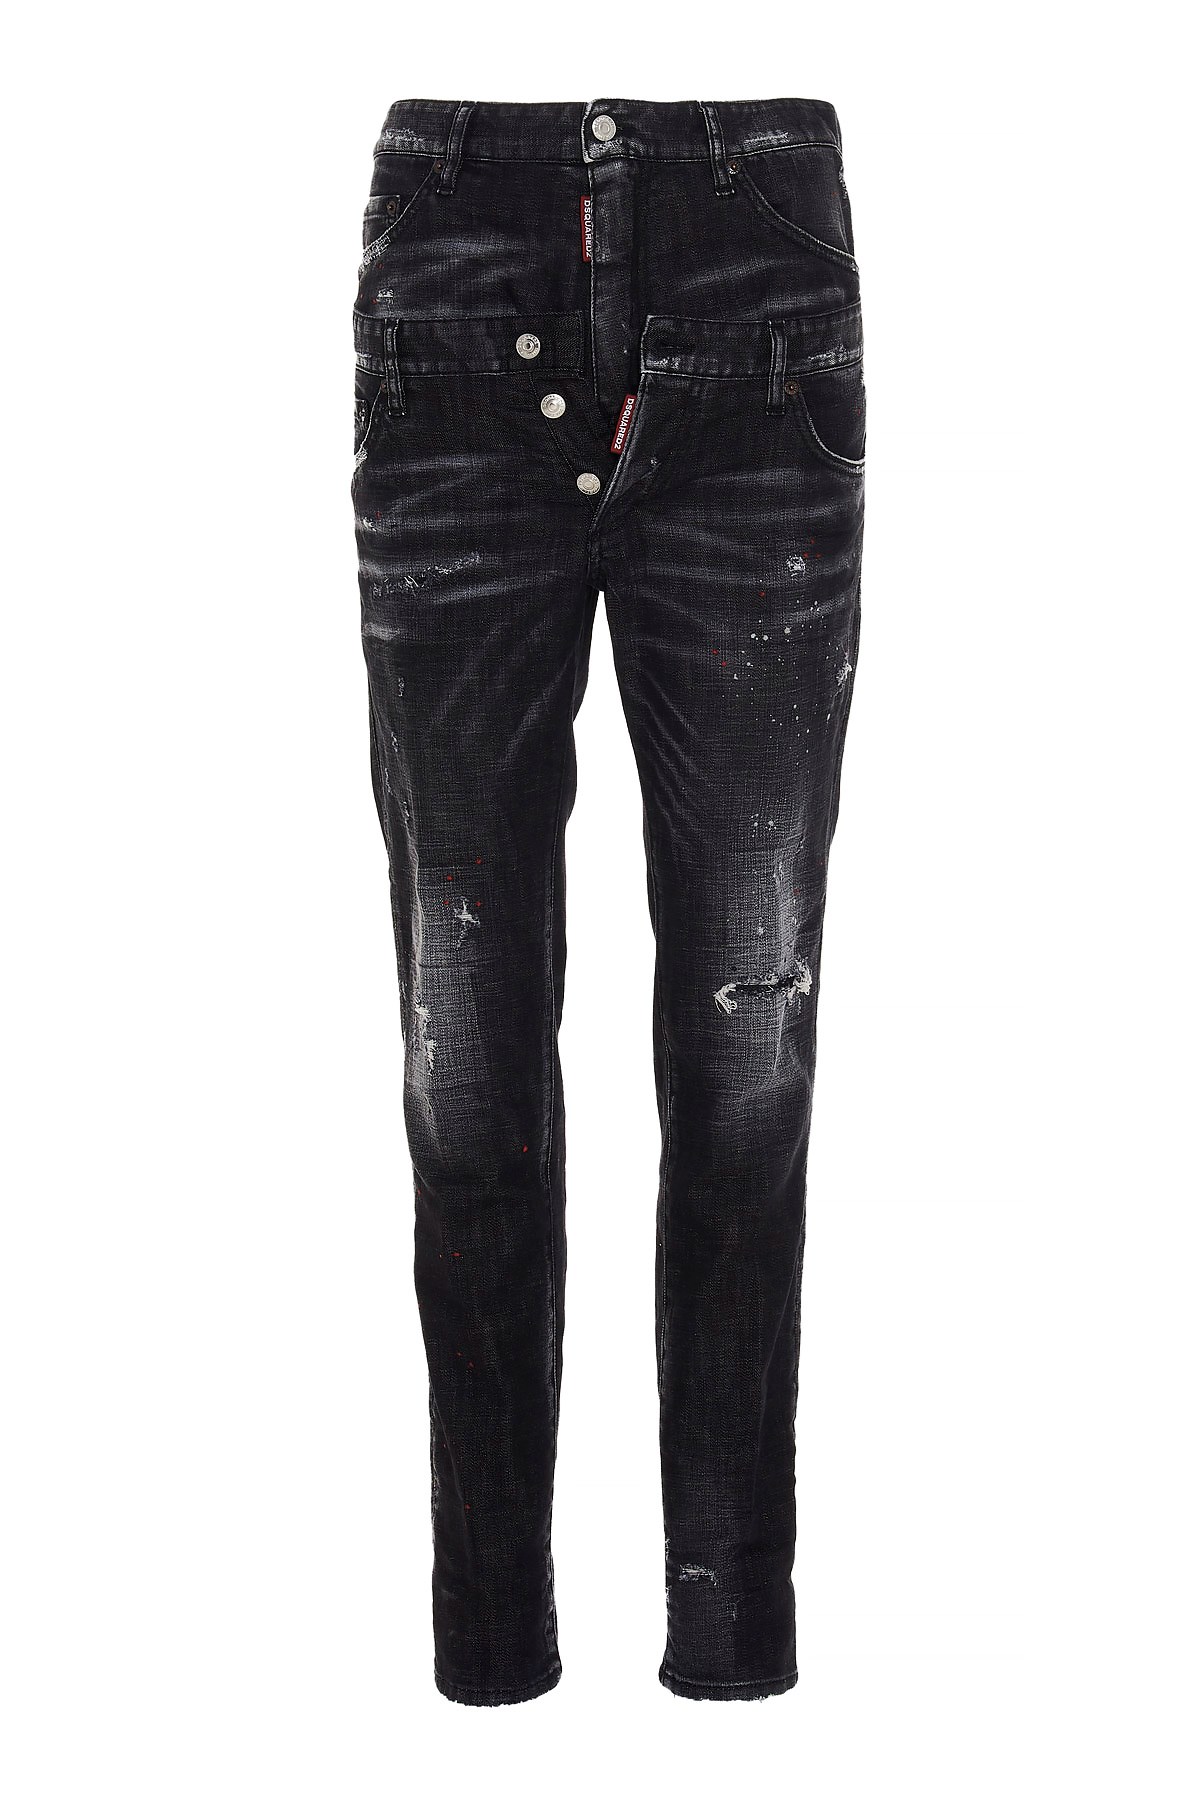 DSQUARED2 'Twin Pack’ Jeans